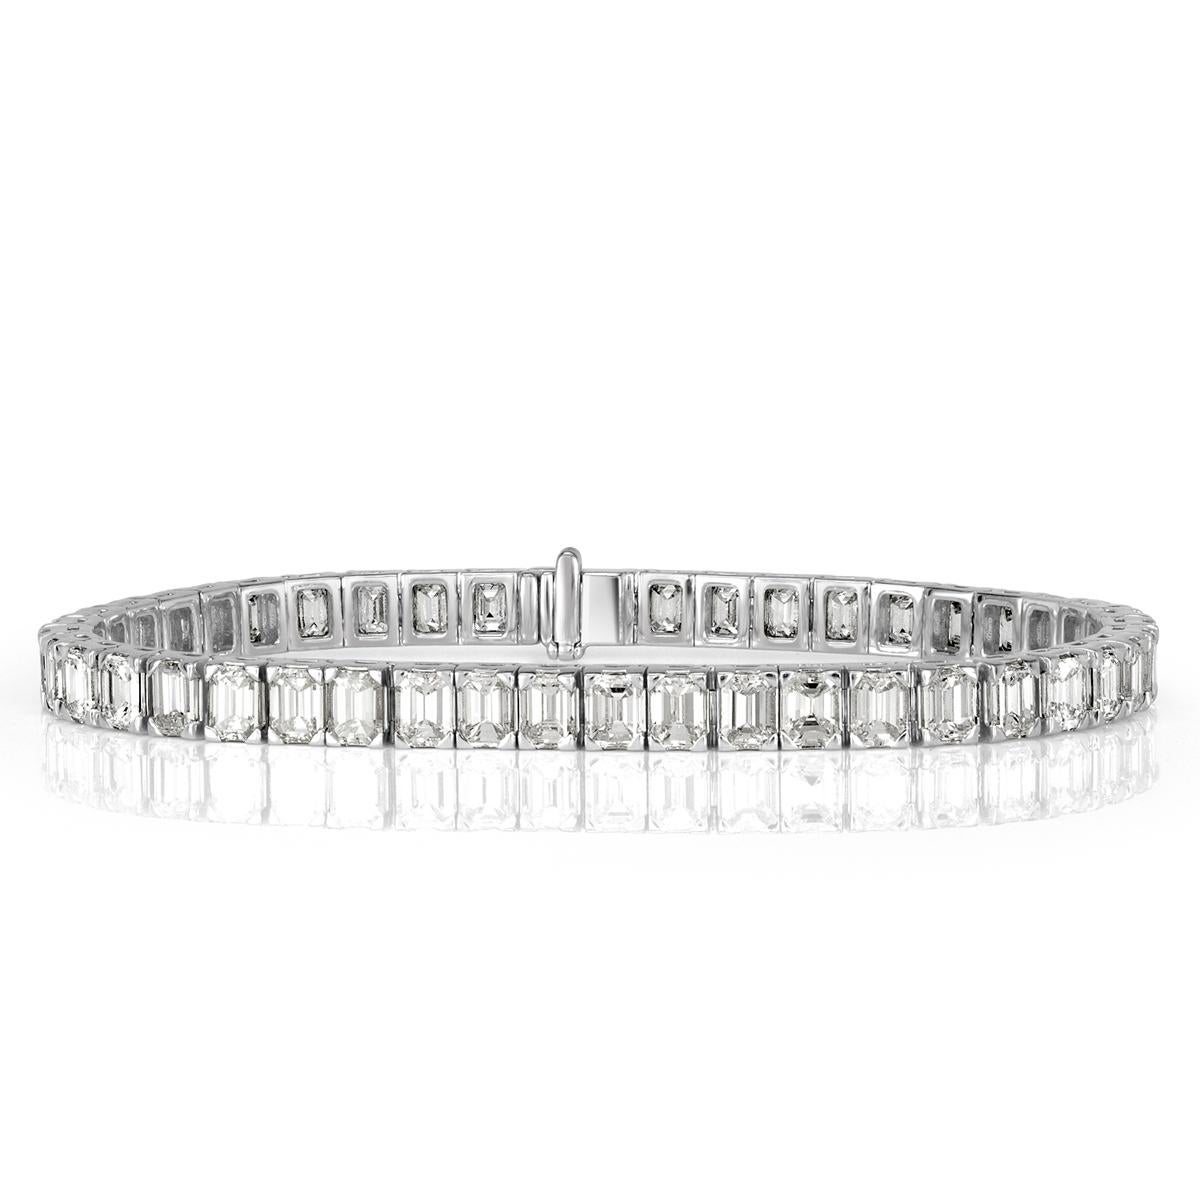 Mark Broumand 11.47 Carat Emerald Cut Diamond Tennis Bracelet in 18 Karat Gold In New Condition For Sale In Los Angeles, CA